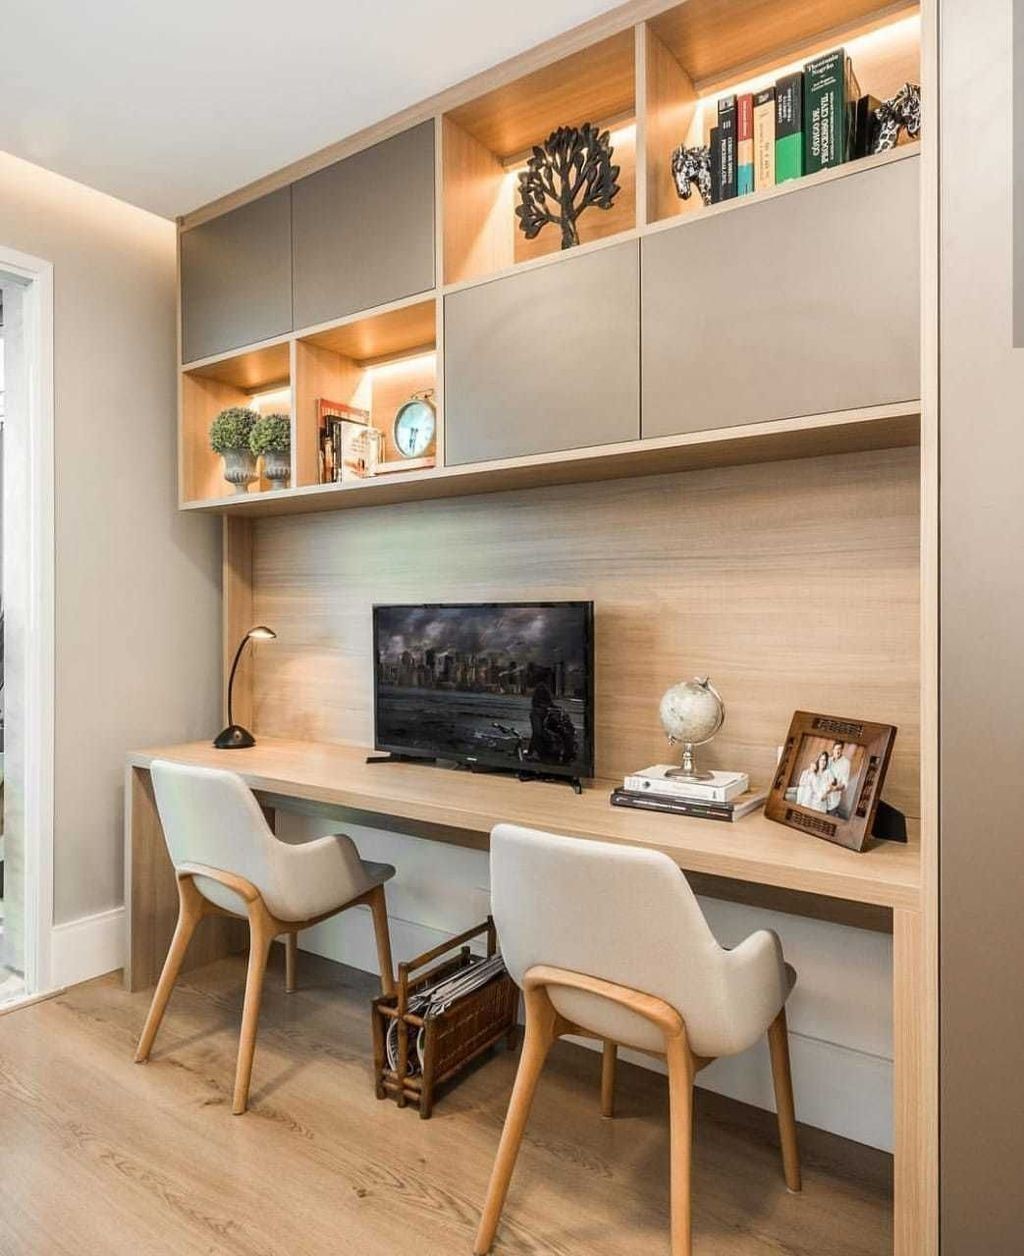 Unique Design Elements for a Great Home Office